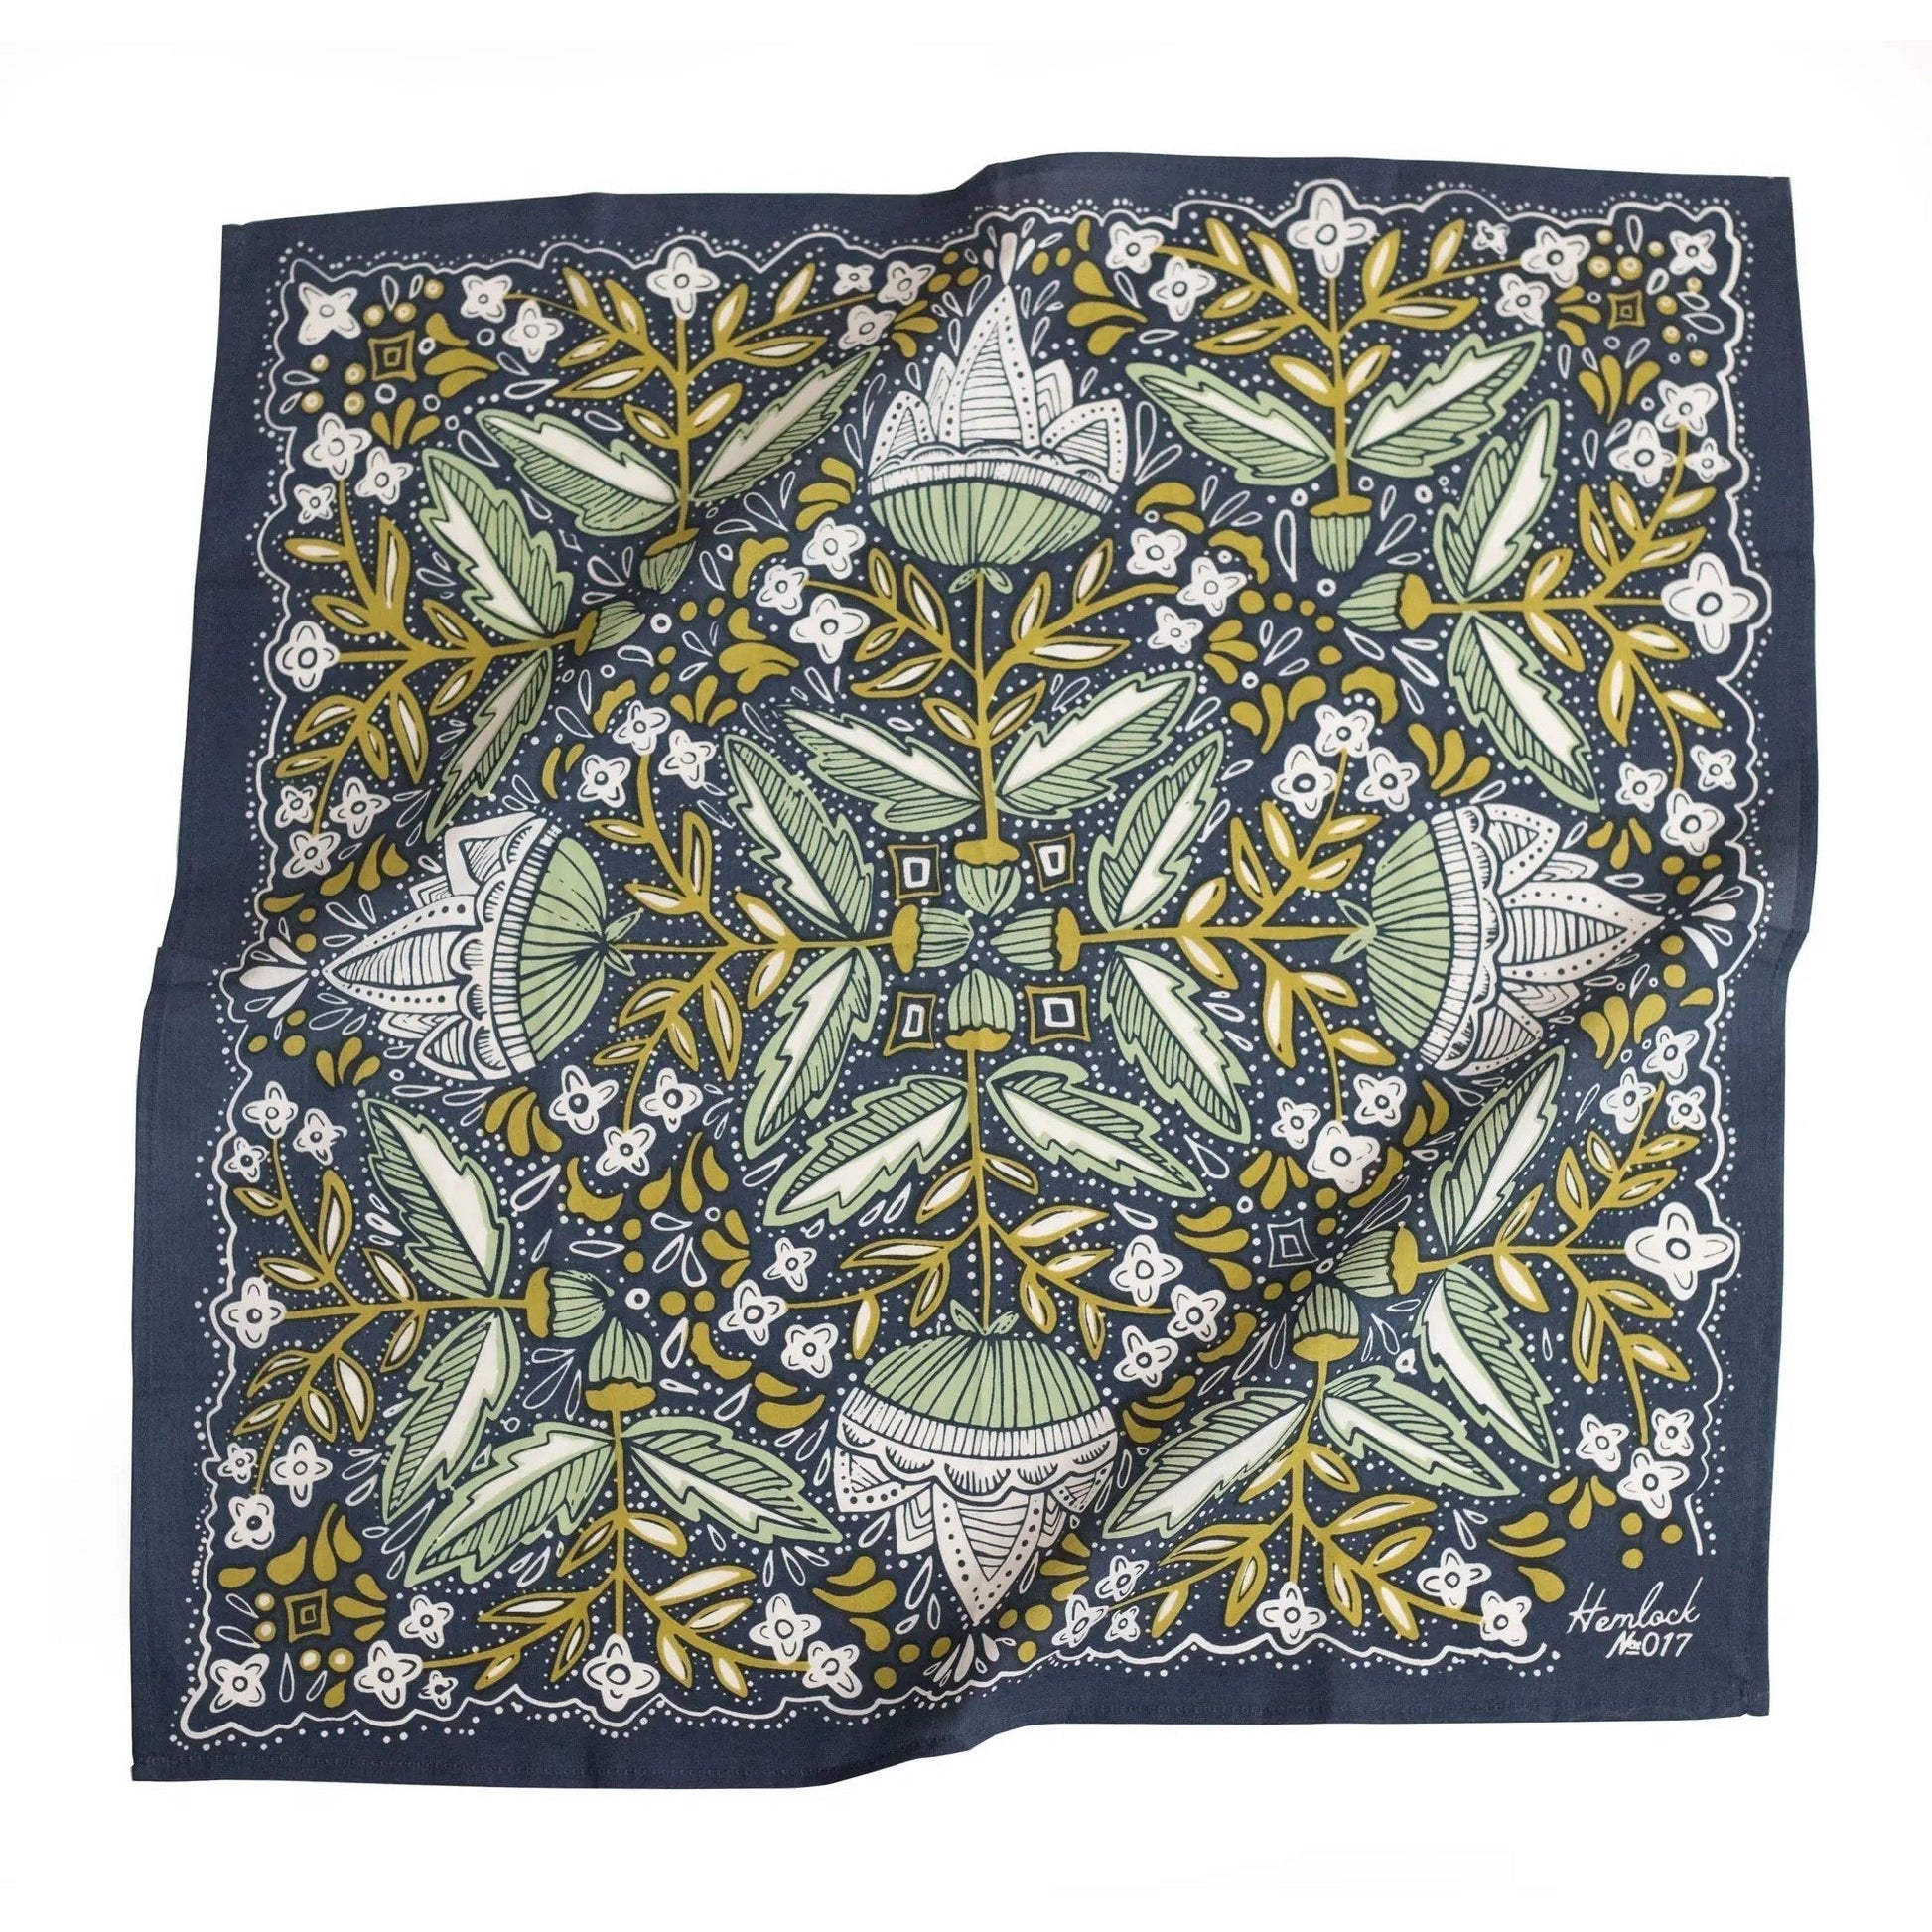 Amelia in Blue with Gold & Green Flowers Bandana | 22" x 22" Premium Cotton